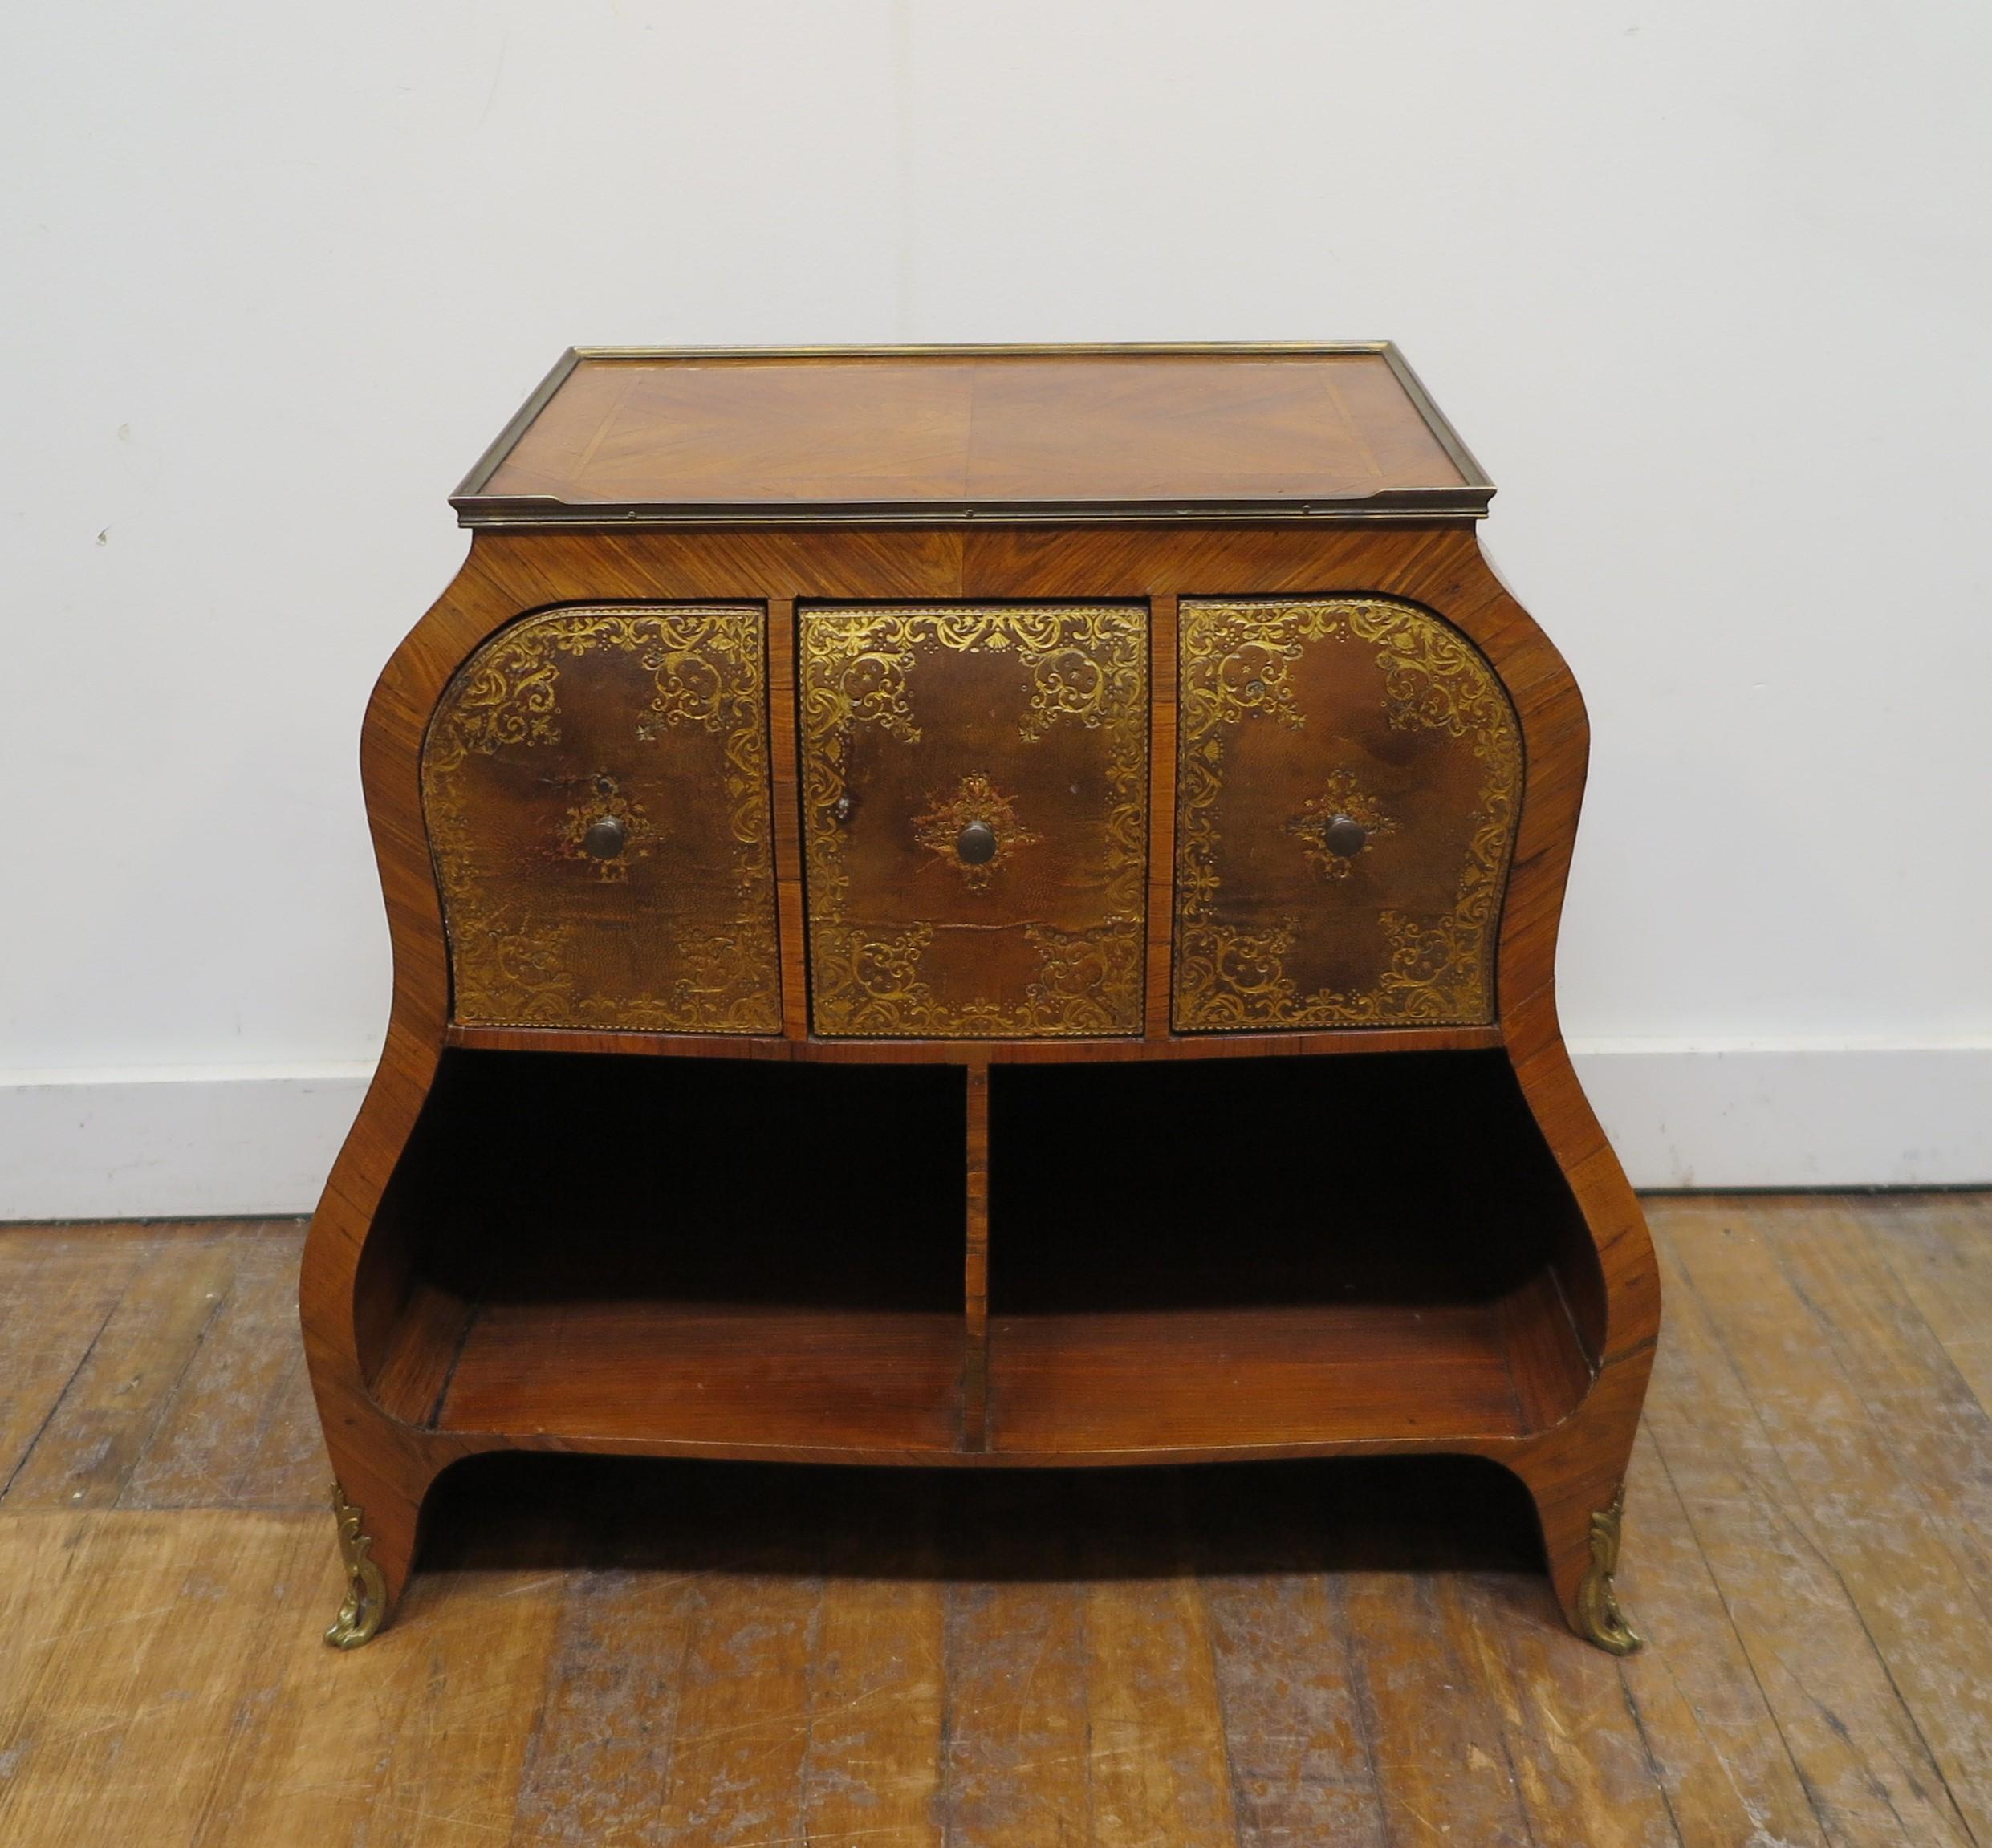 French antique side table in the style of Louis XV with three leather embossed drawers and two lower compartment shelfs. Stunning marquetry work adorn a beautifully shaped body with solid brass trim detail top and feet. The design workmanship to the